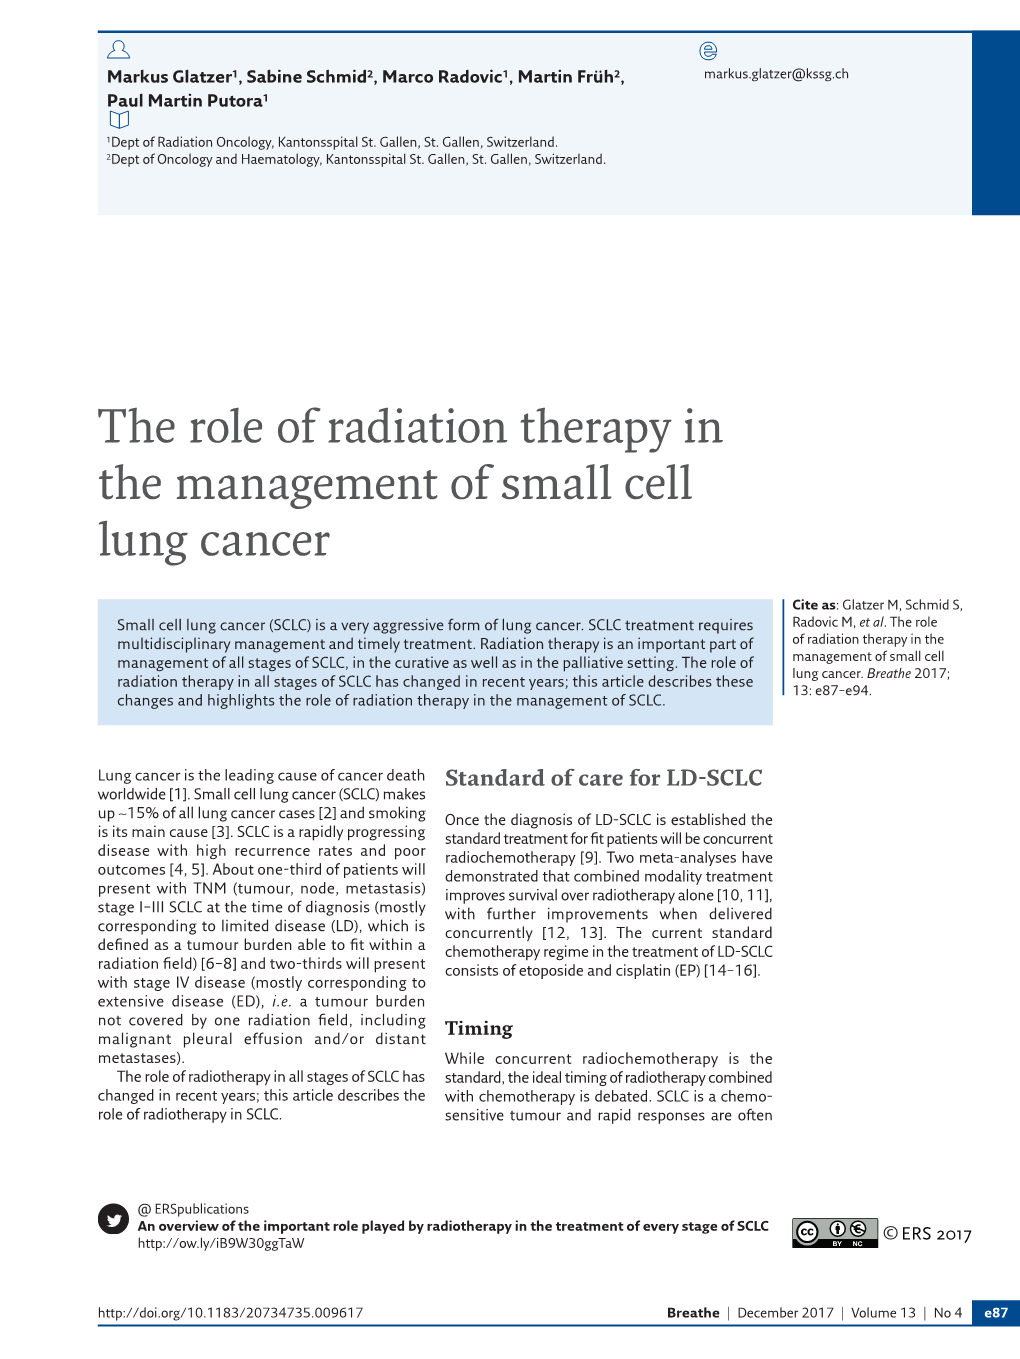 The Role of Radiation Therapy in the Management of Small Cell Lung Cancer